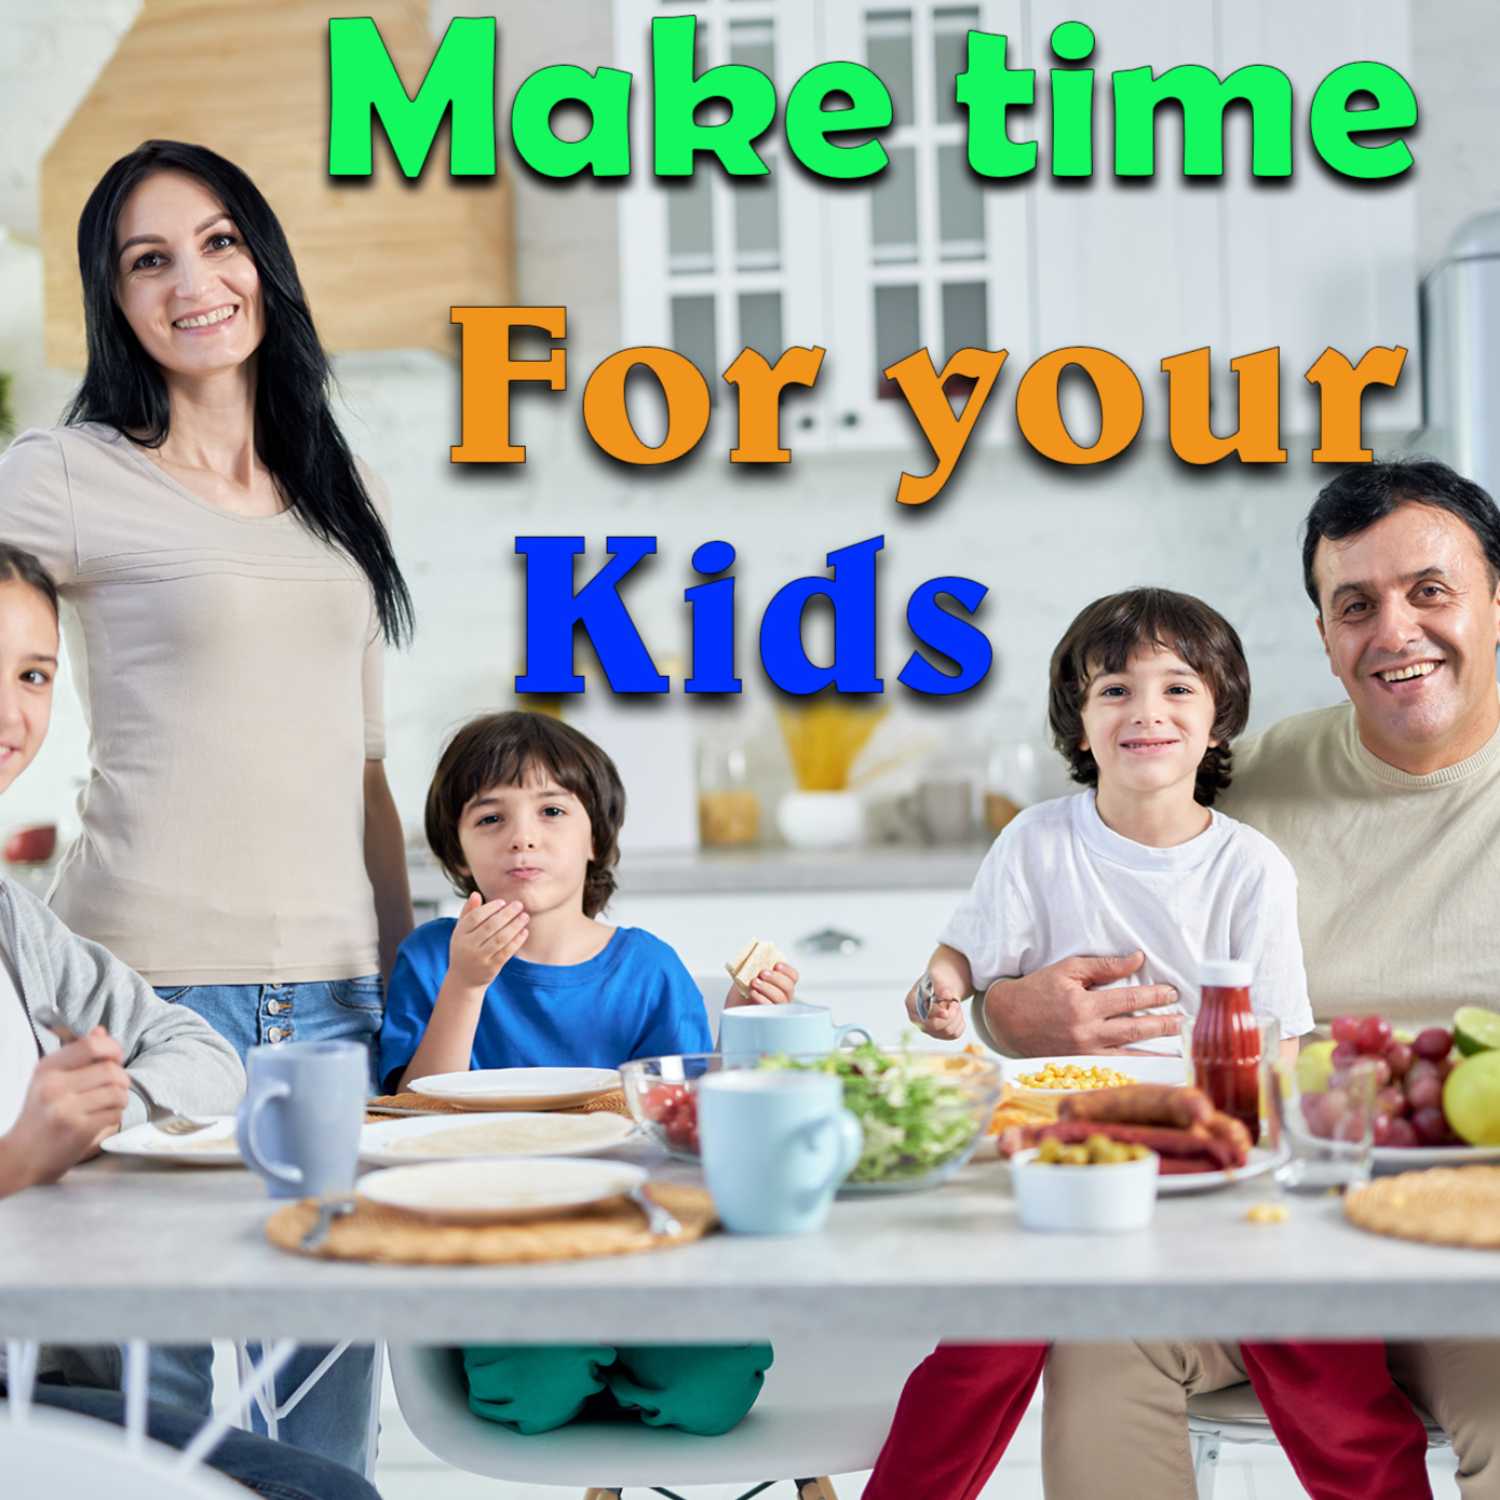 Quick Tips to Make Time for Your Kids